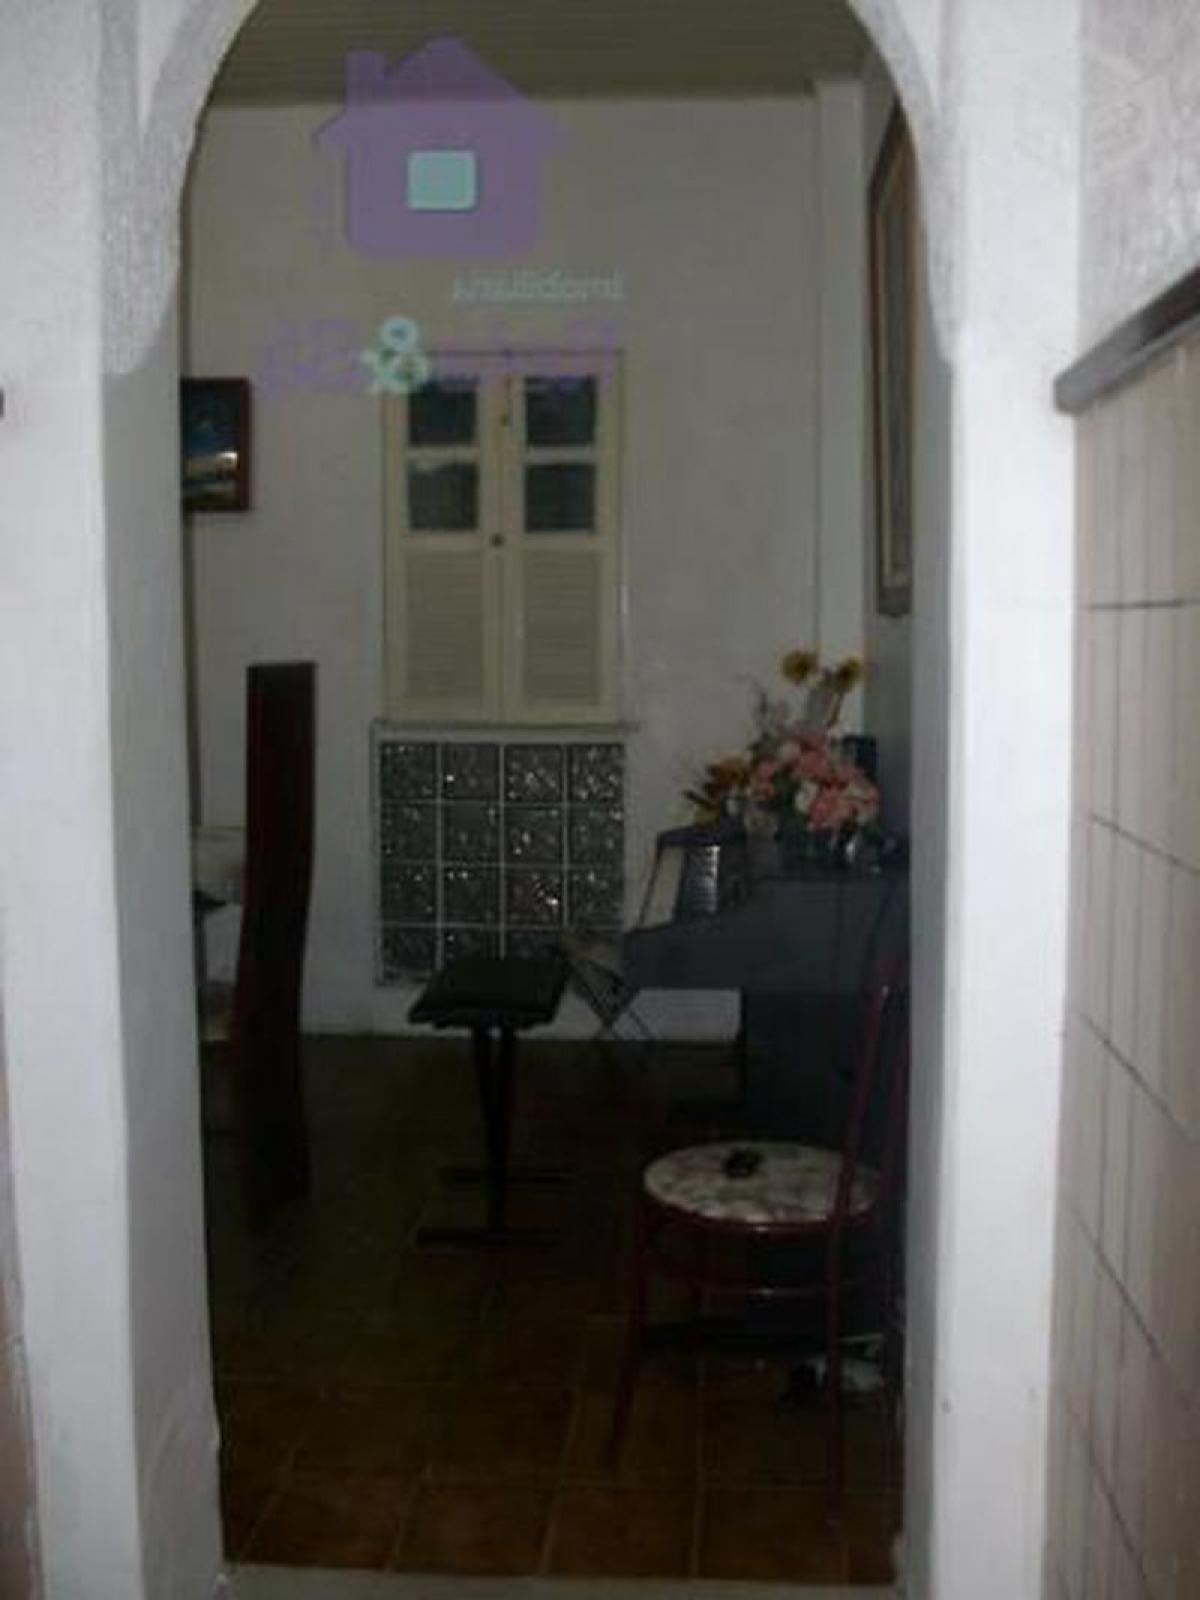 Picture of Home For Sale in Salvador, Bahia, Brazil